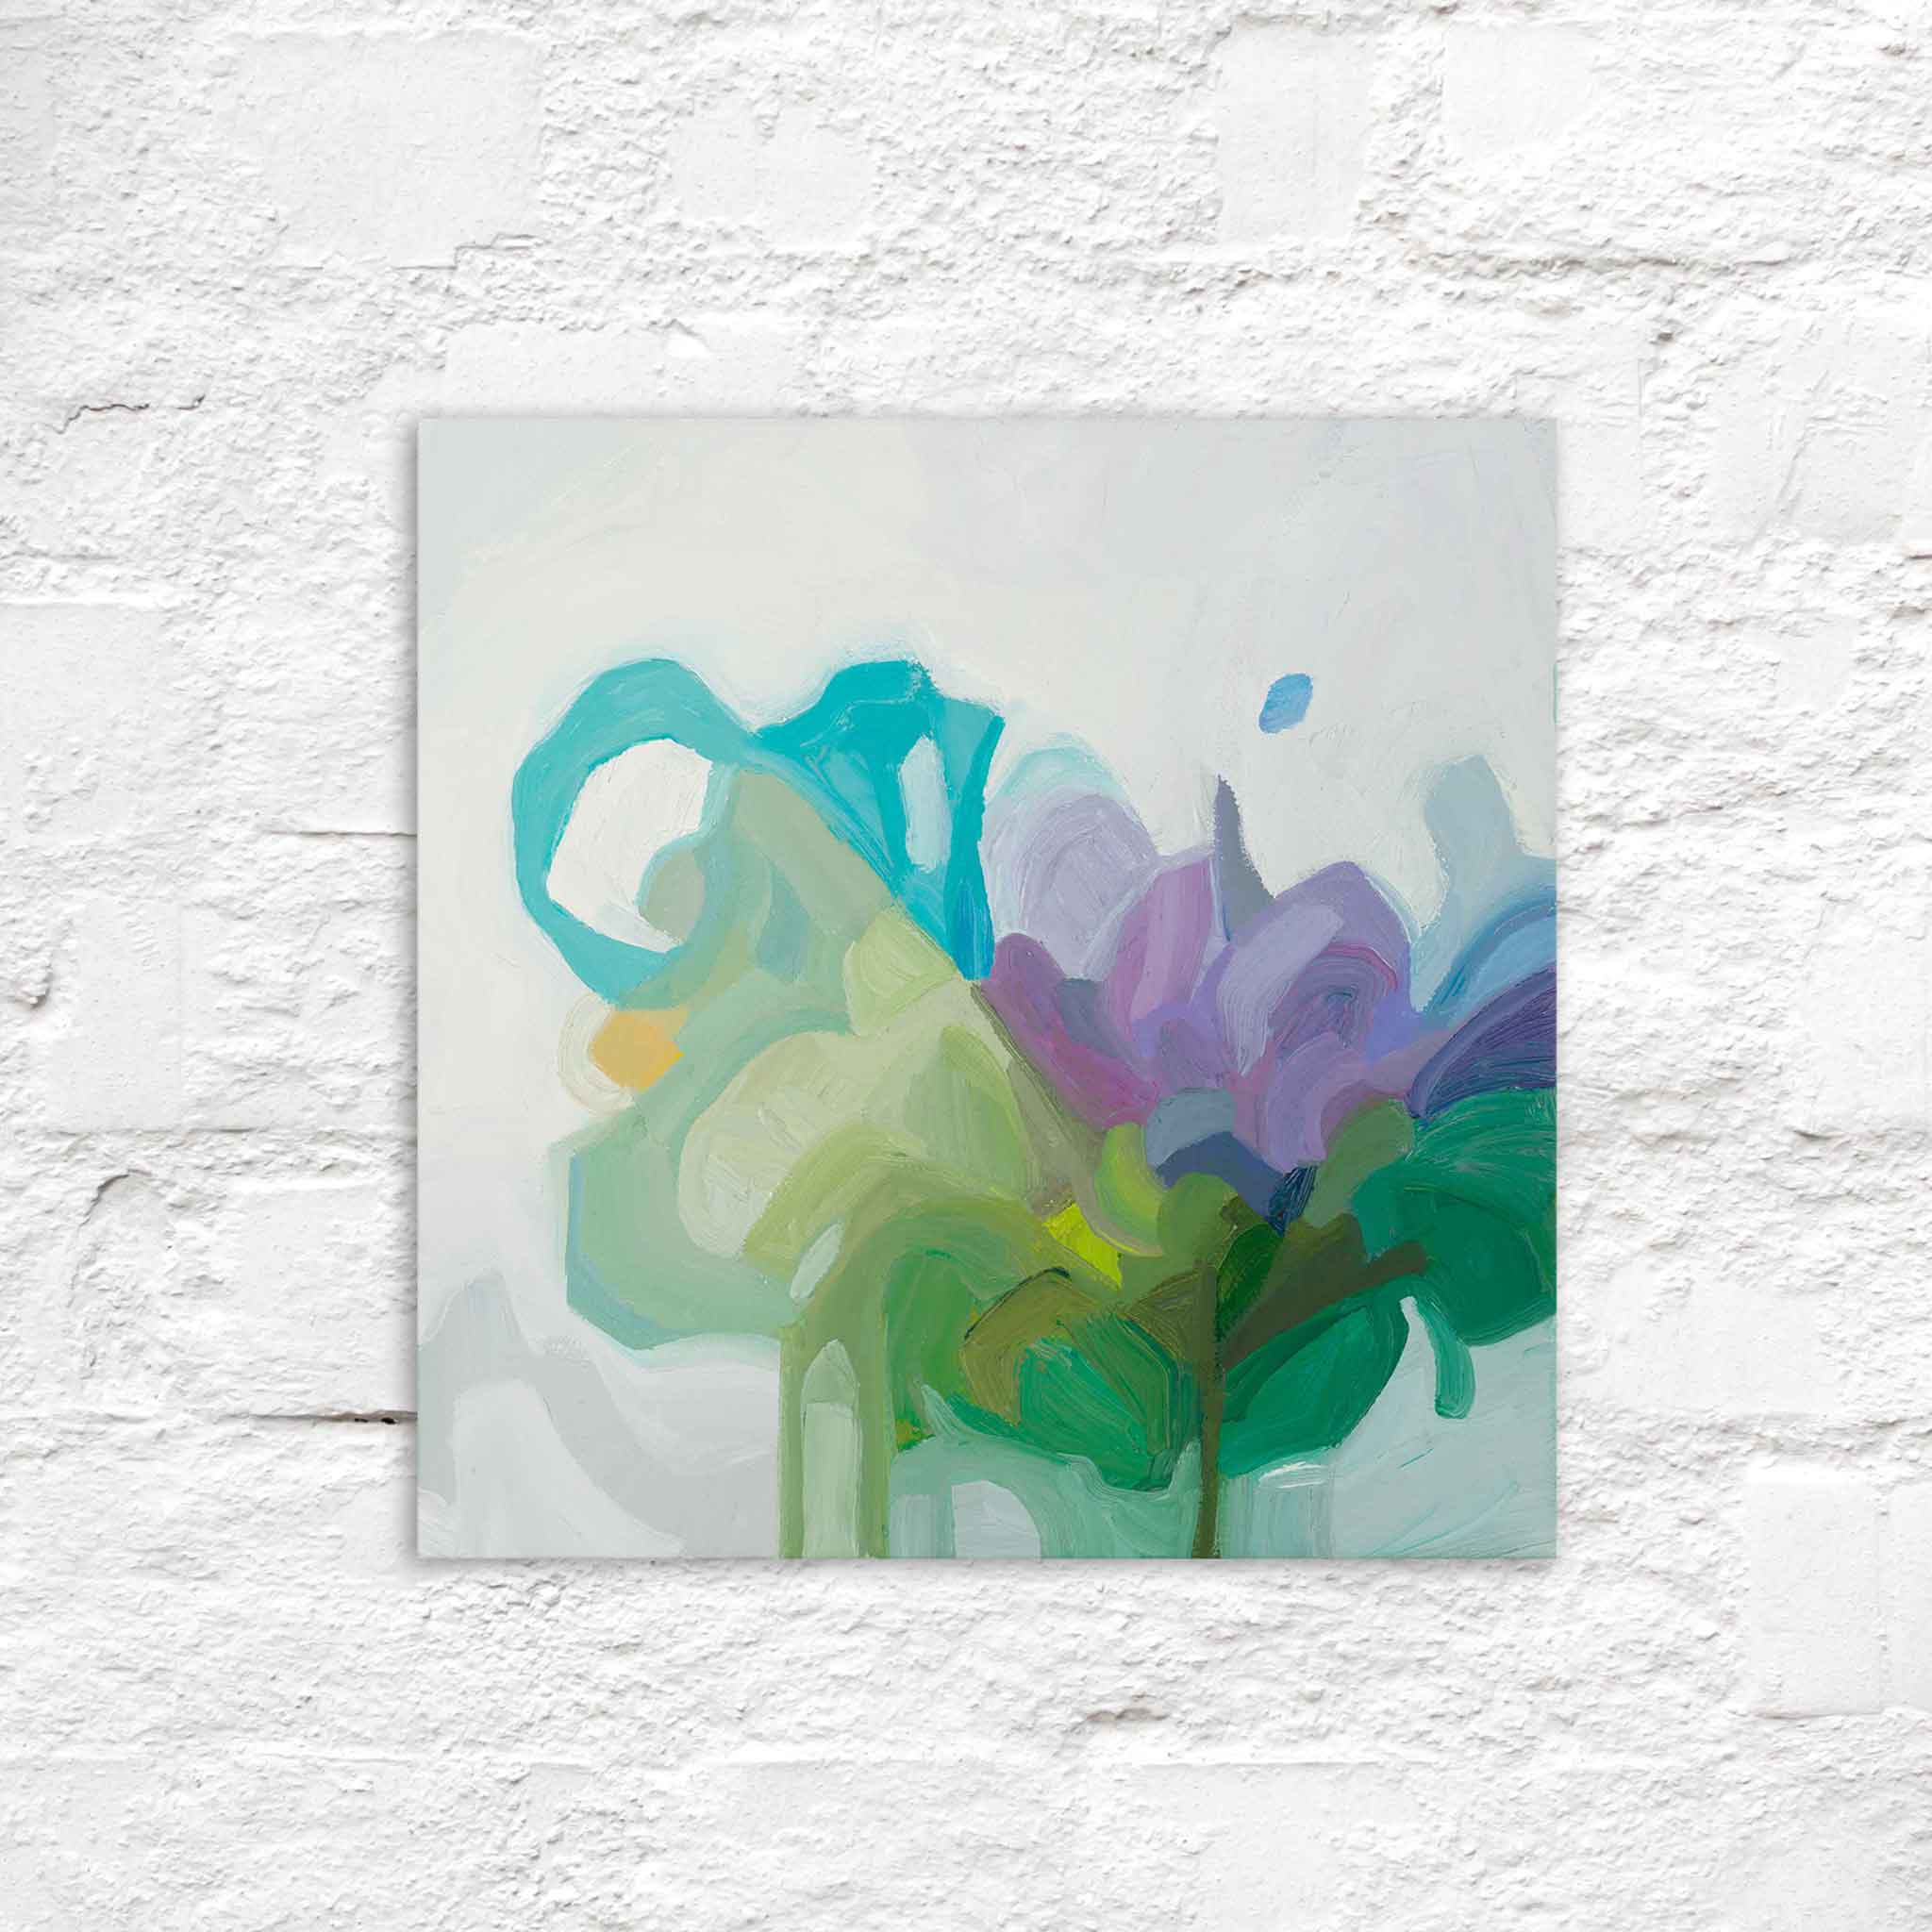 oil abstract paintings painted in turquoise mauve emerald green and light green